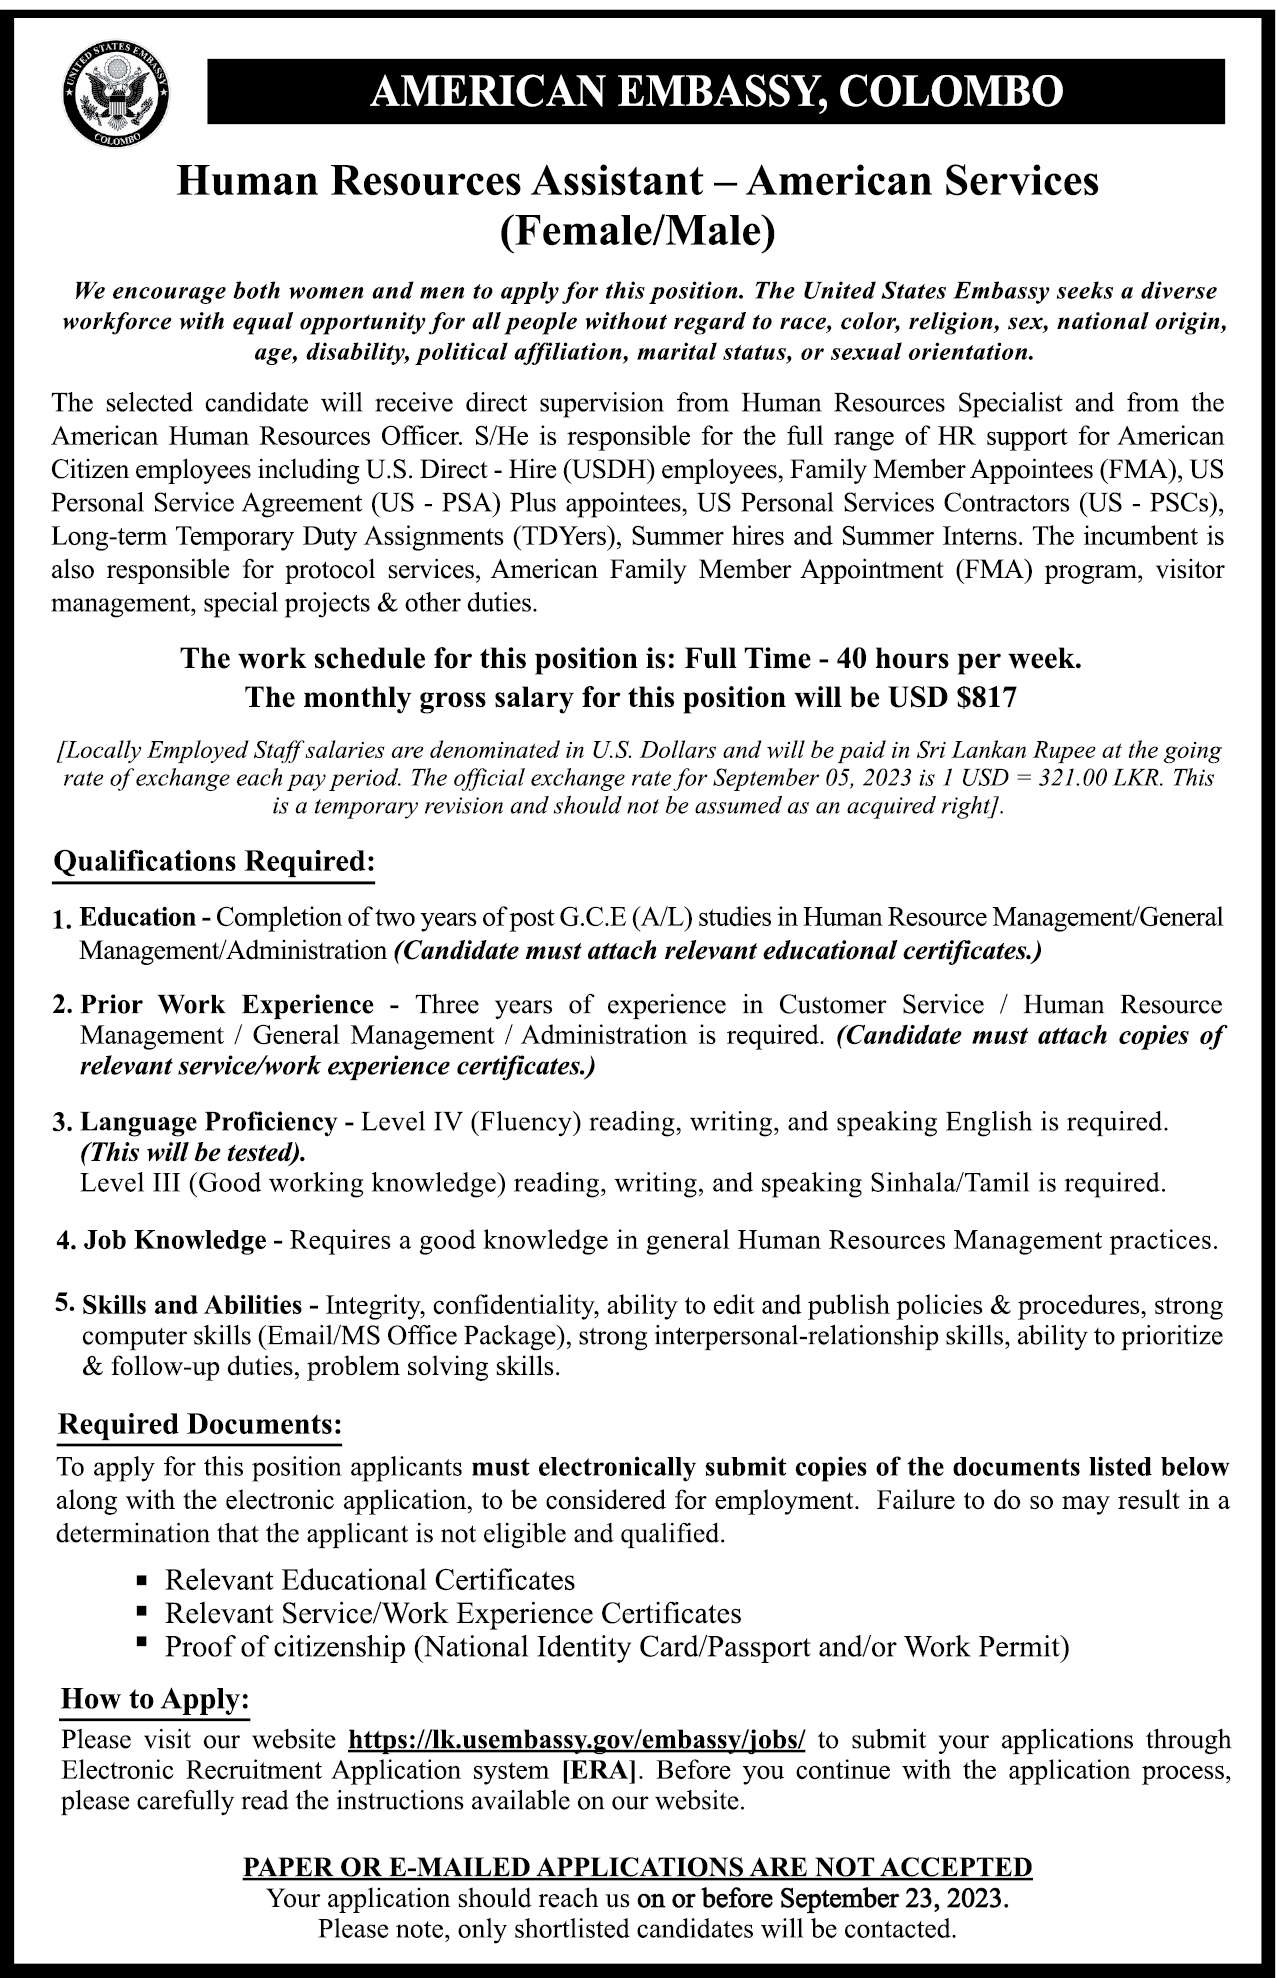 Human Resource Assistant - American Embassy, Colombo